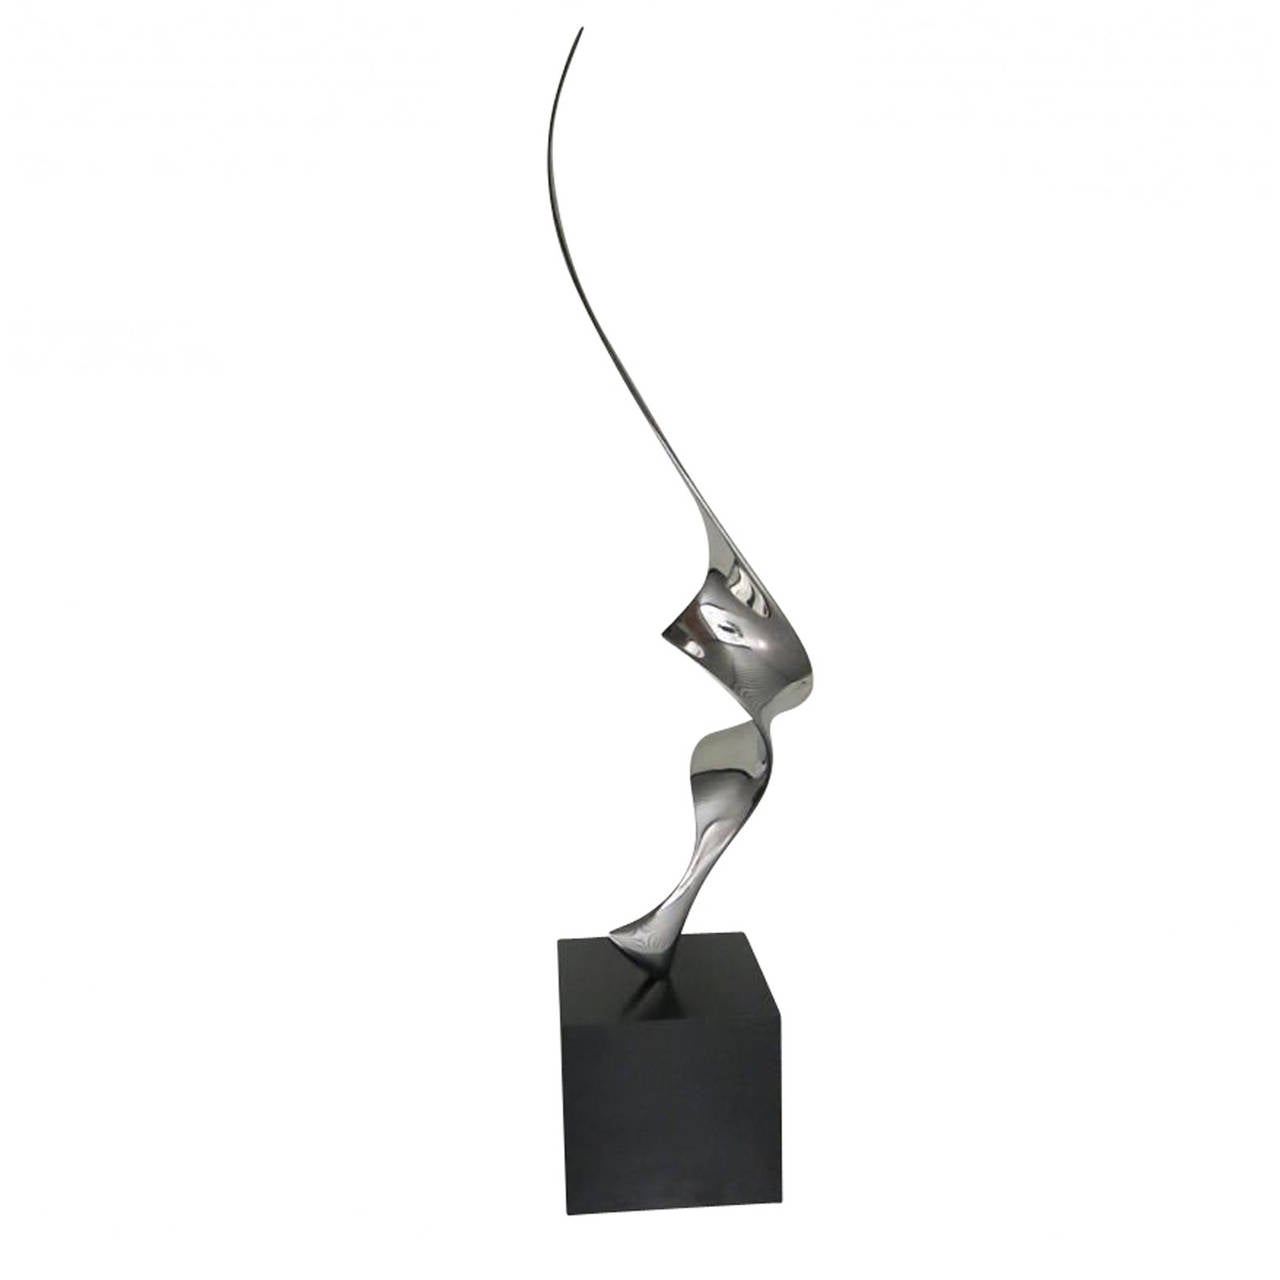 American Impressive Stainless Steel Sculpture by Lou Pearson